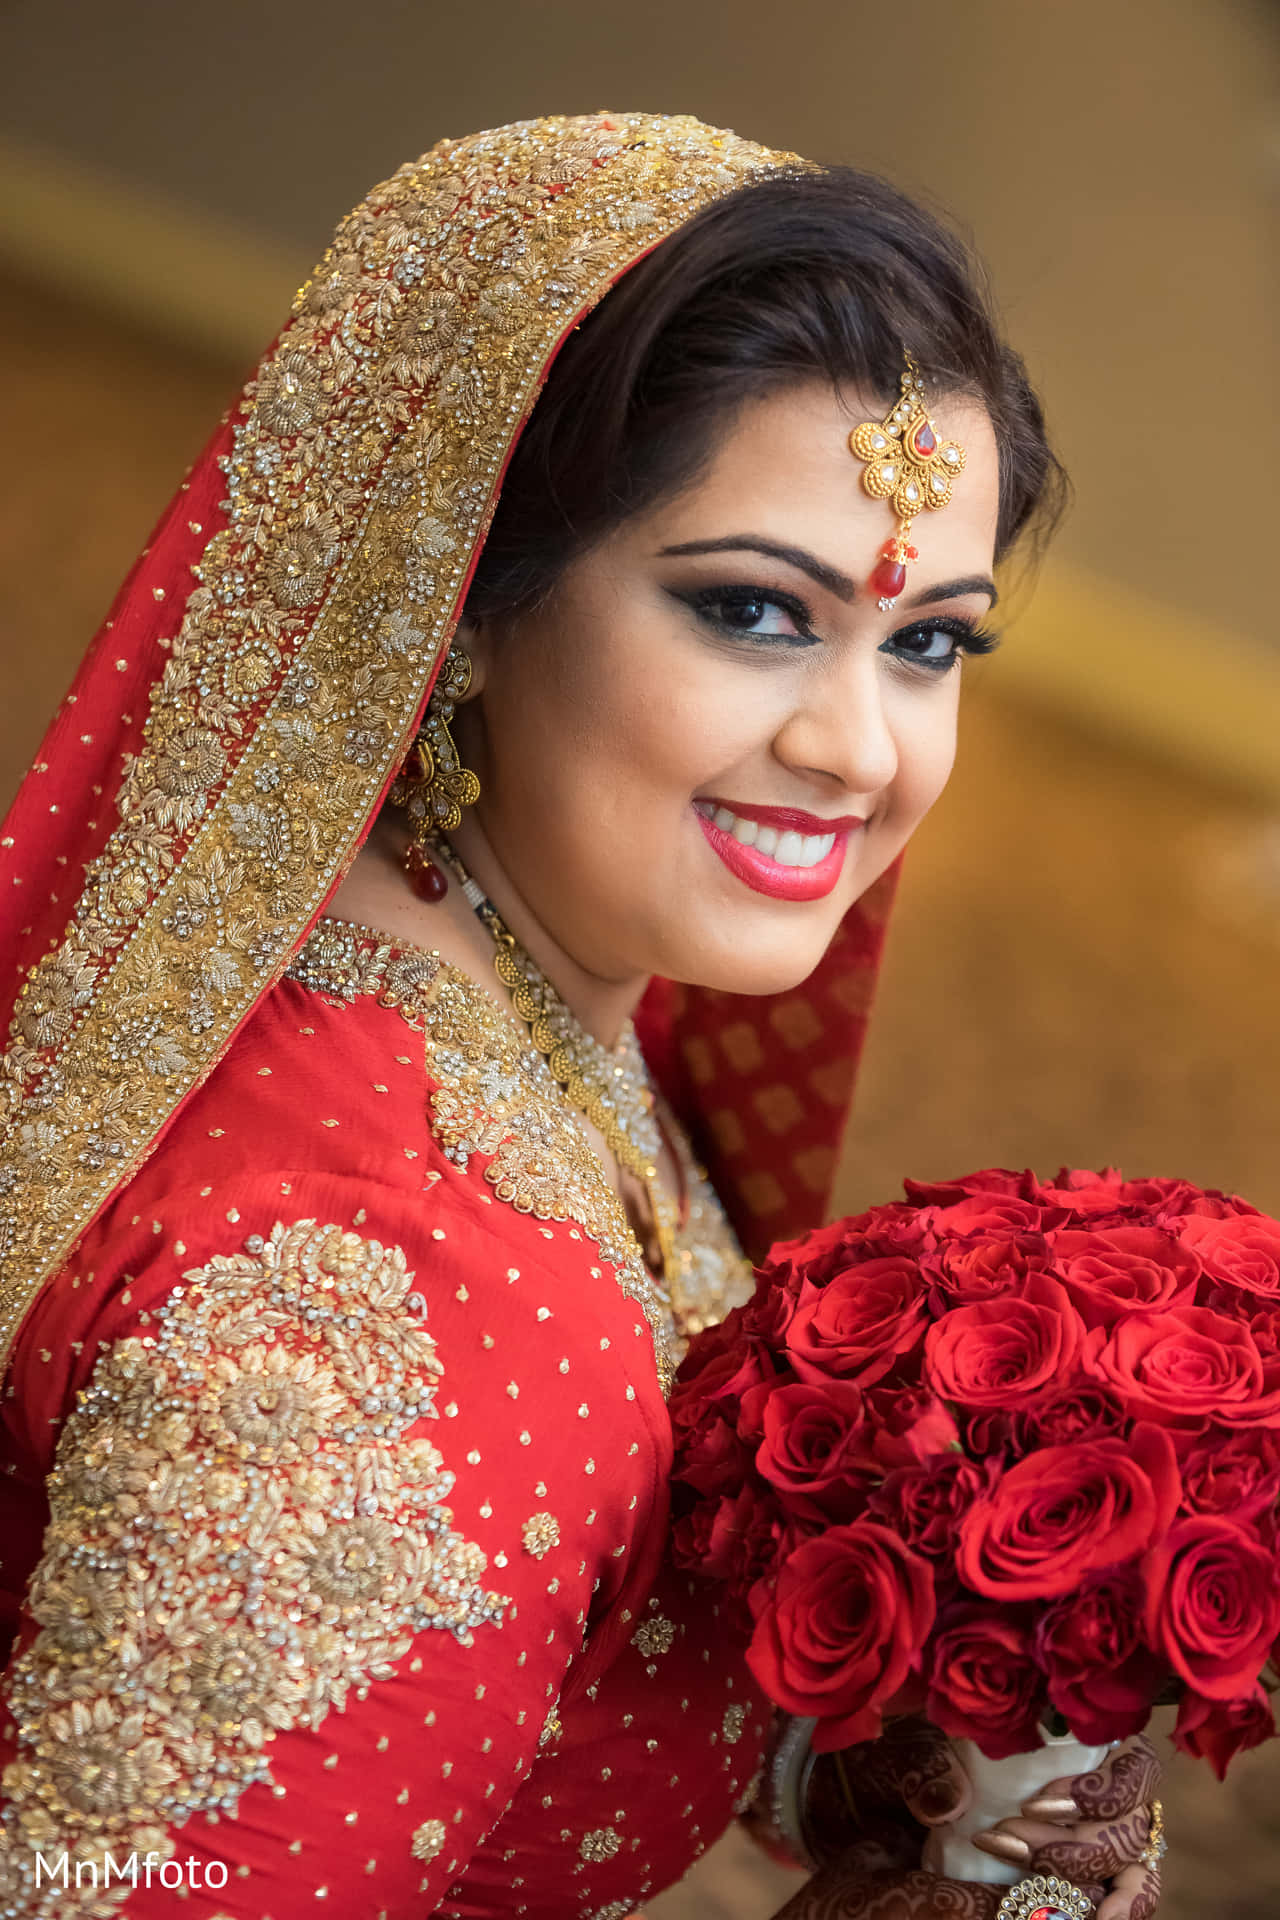 Indian Bride With Bouquet Of Flowers Picture